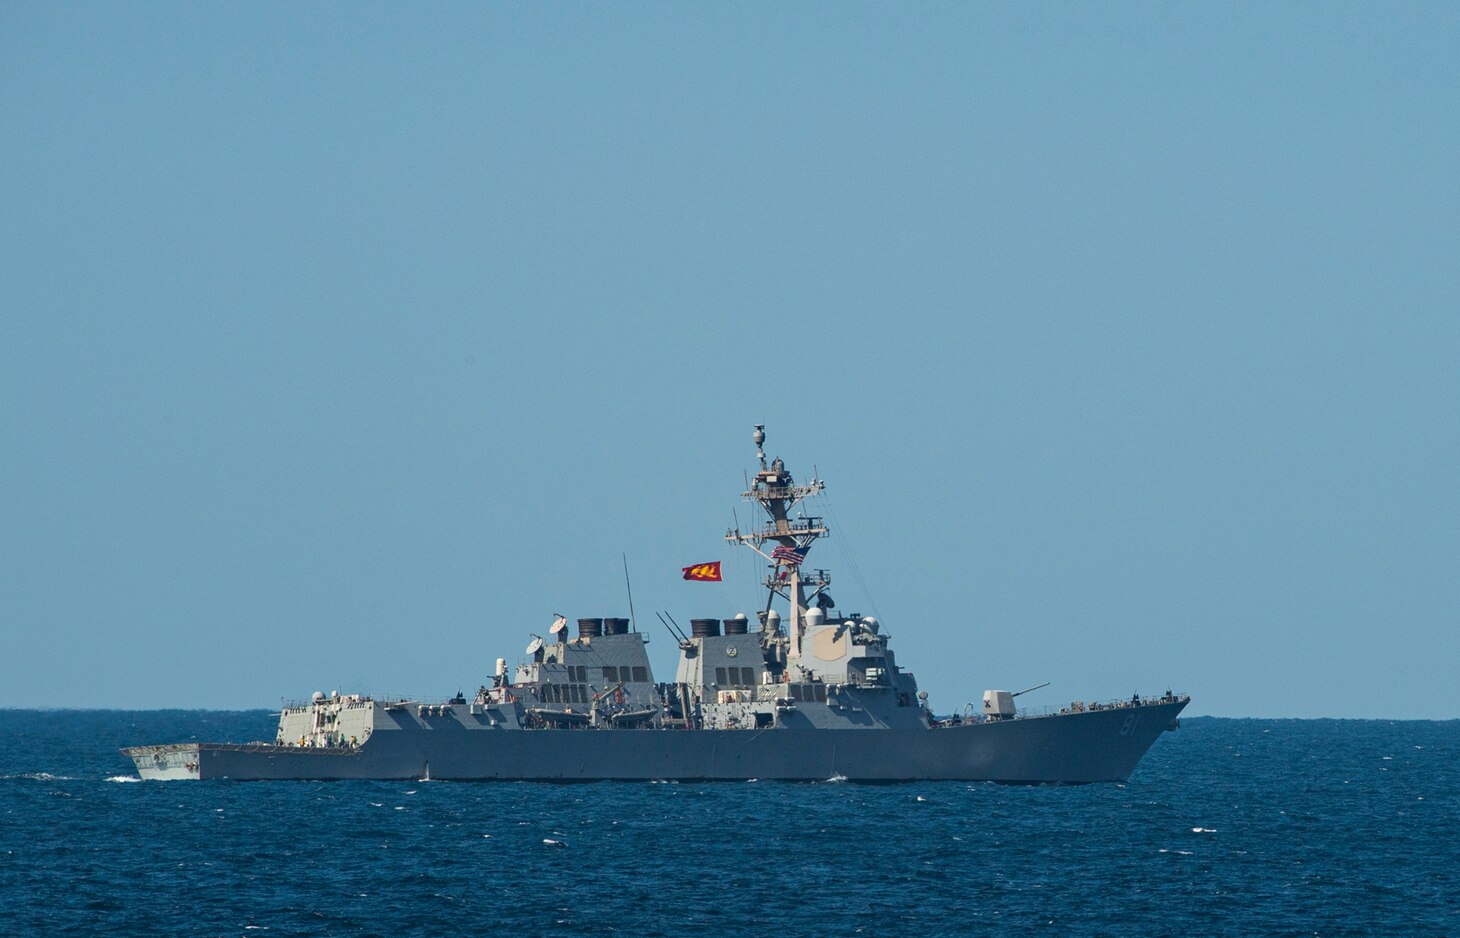 The guided-missile destroyer USS Winston S. Churchill (DDG 81) steams in the Arabian Sea.